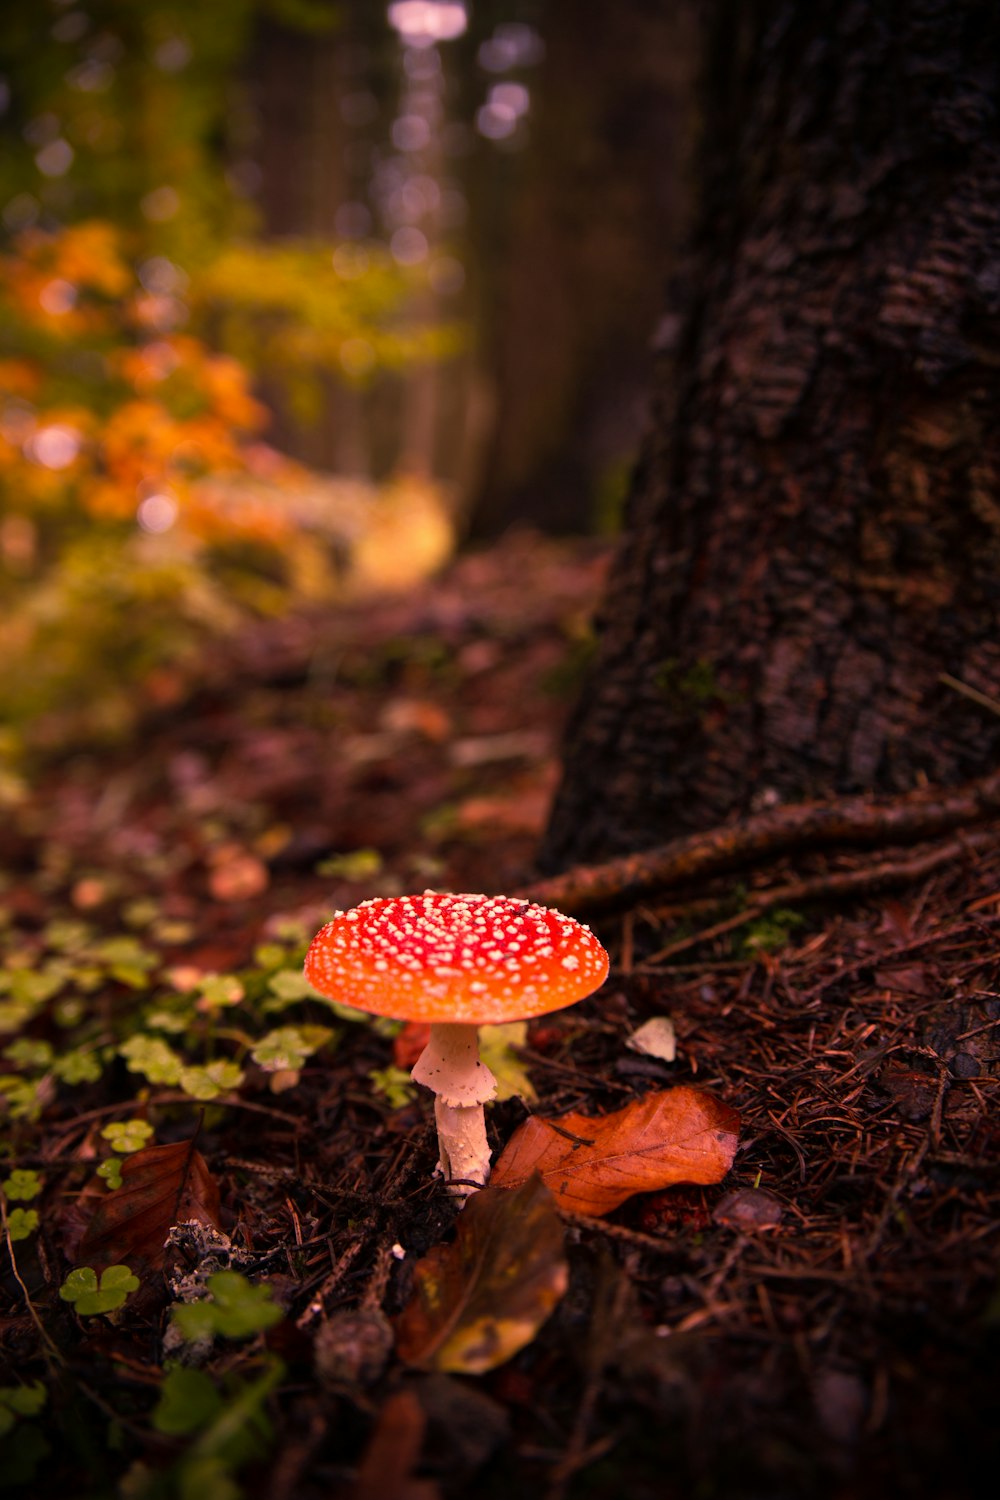 orange and white mushroom under brown tree in close up photography